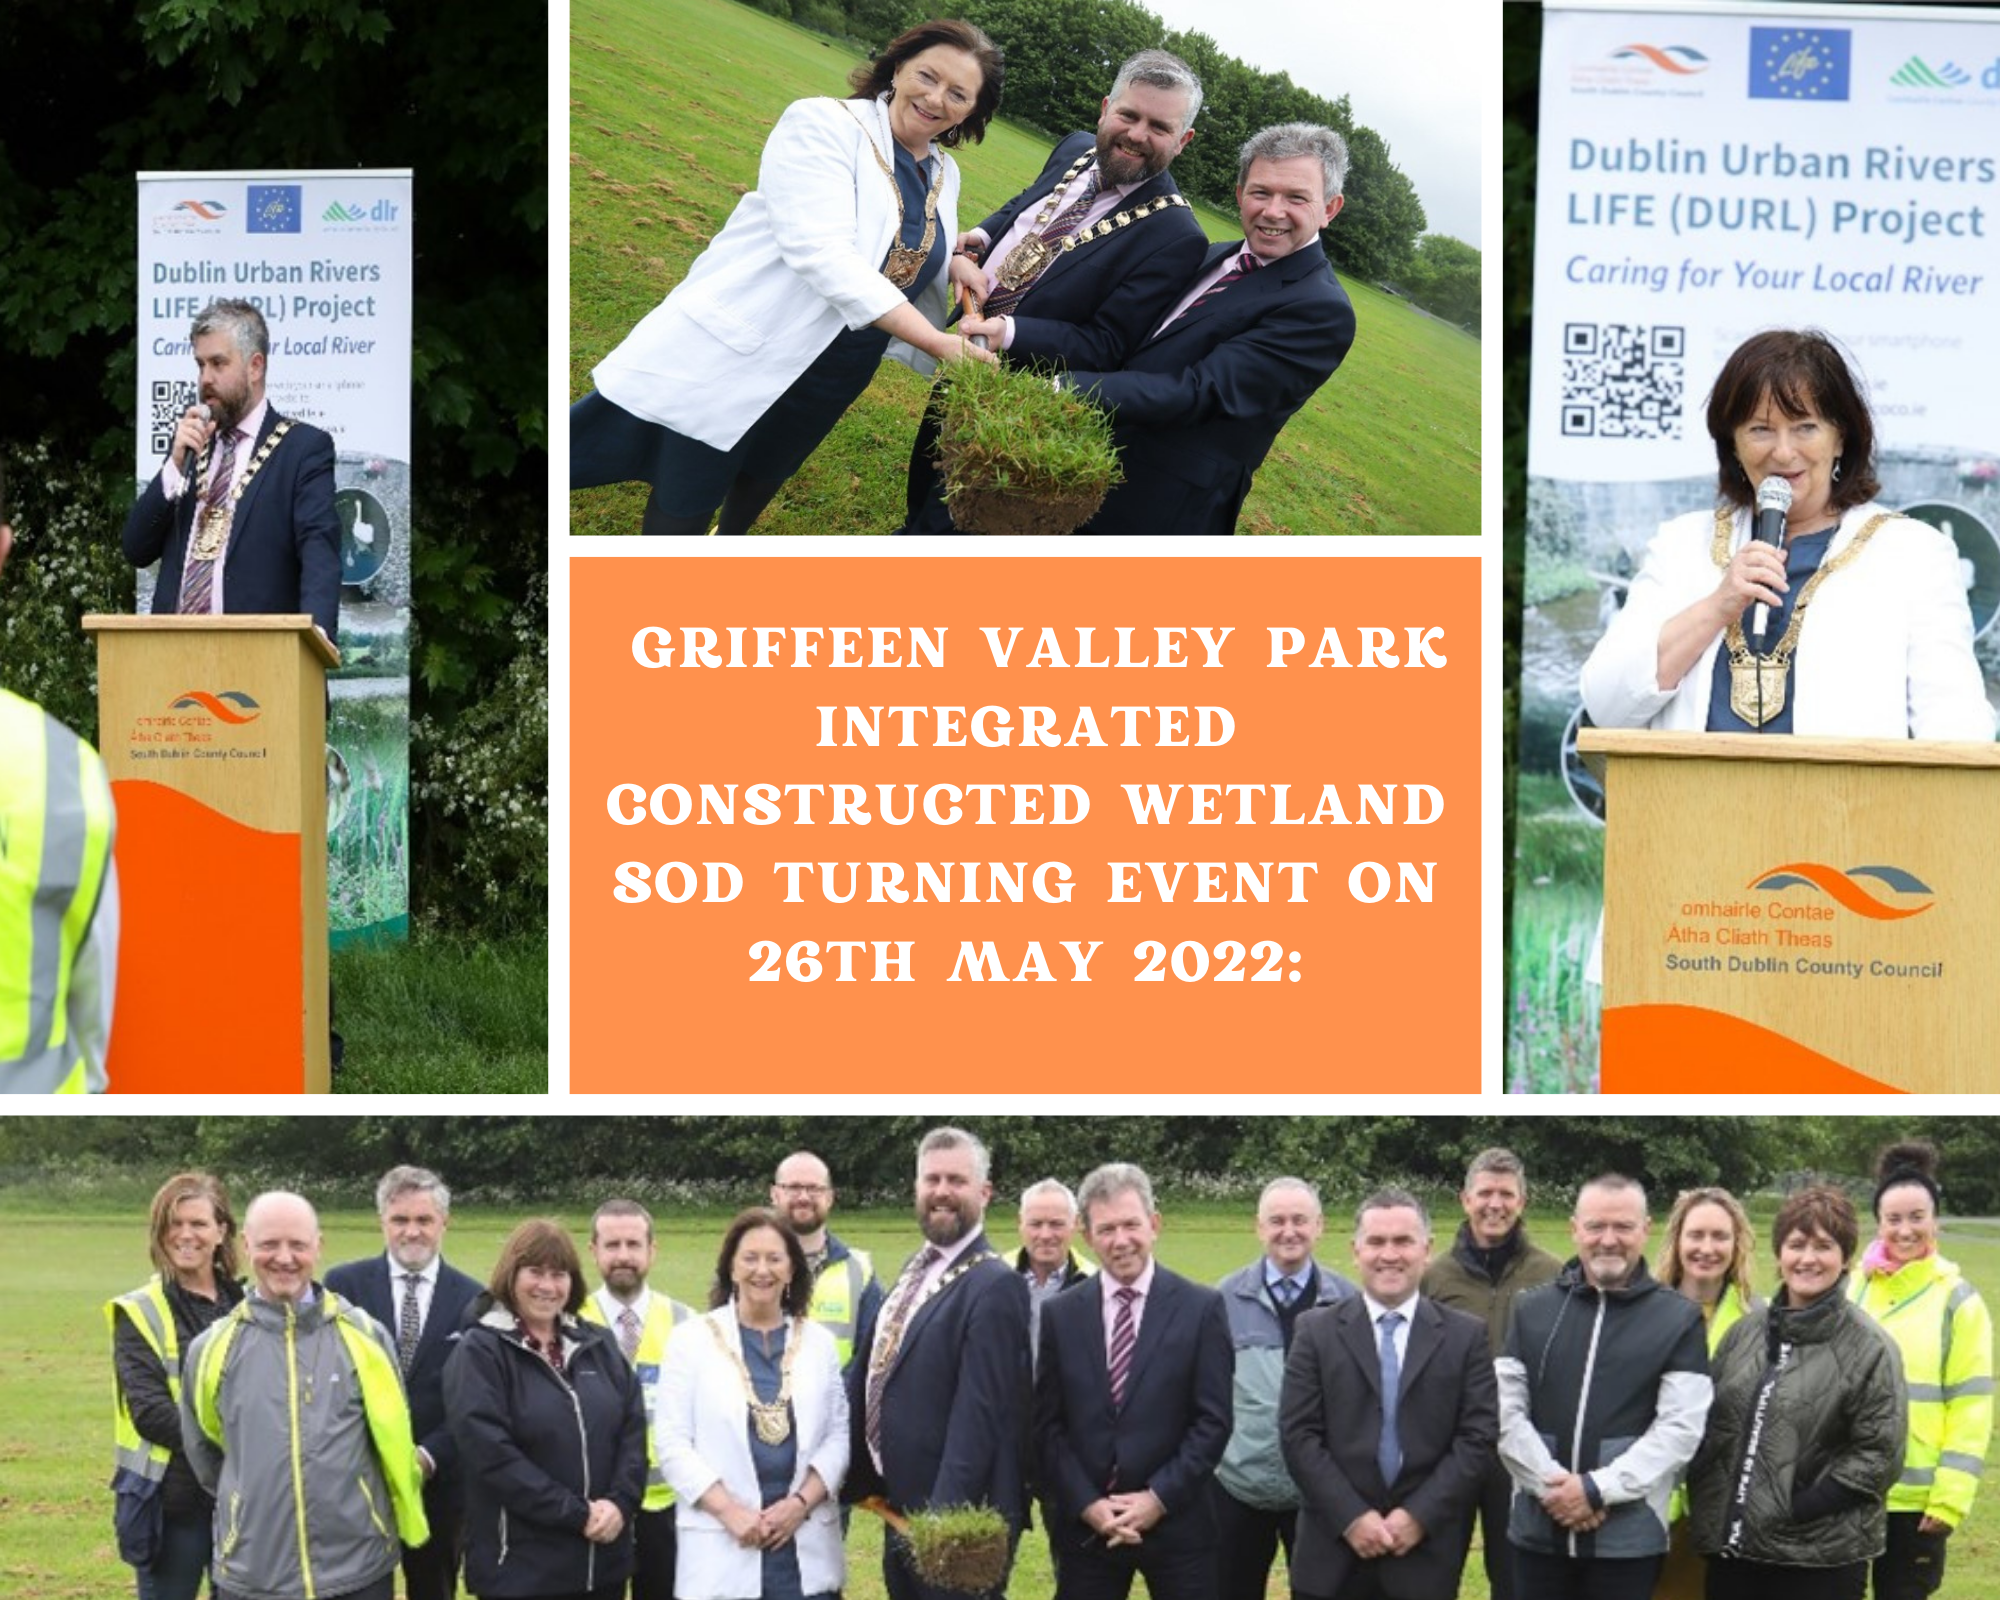 Griffeen-Valley-Park-Sod-Turning--26th-May-2022